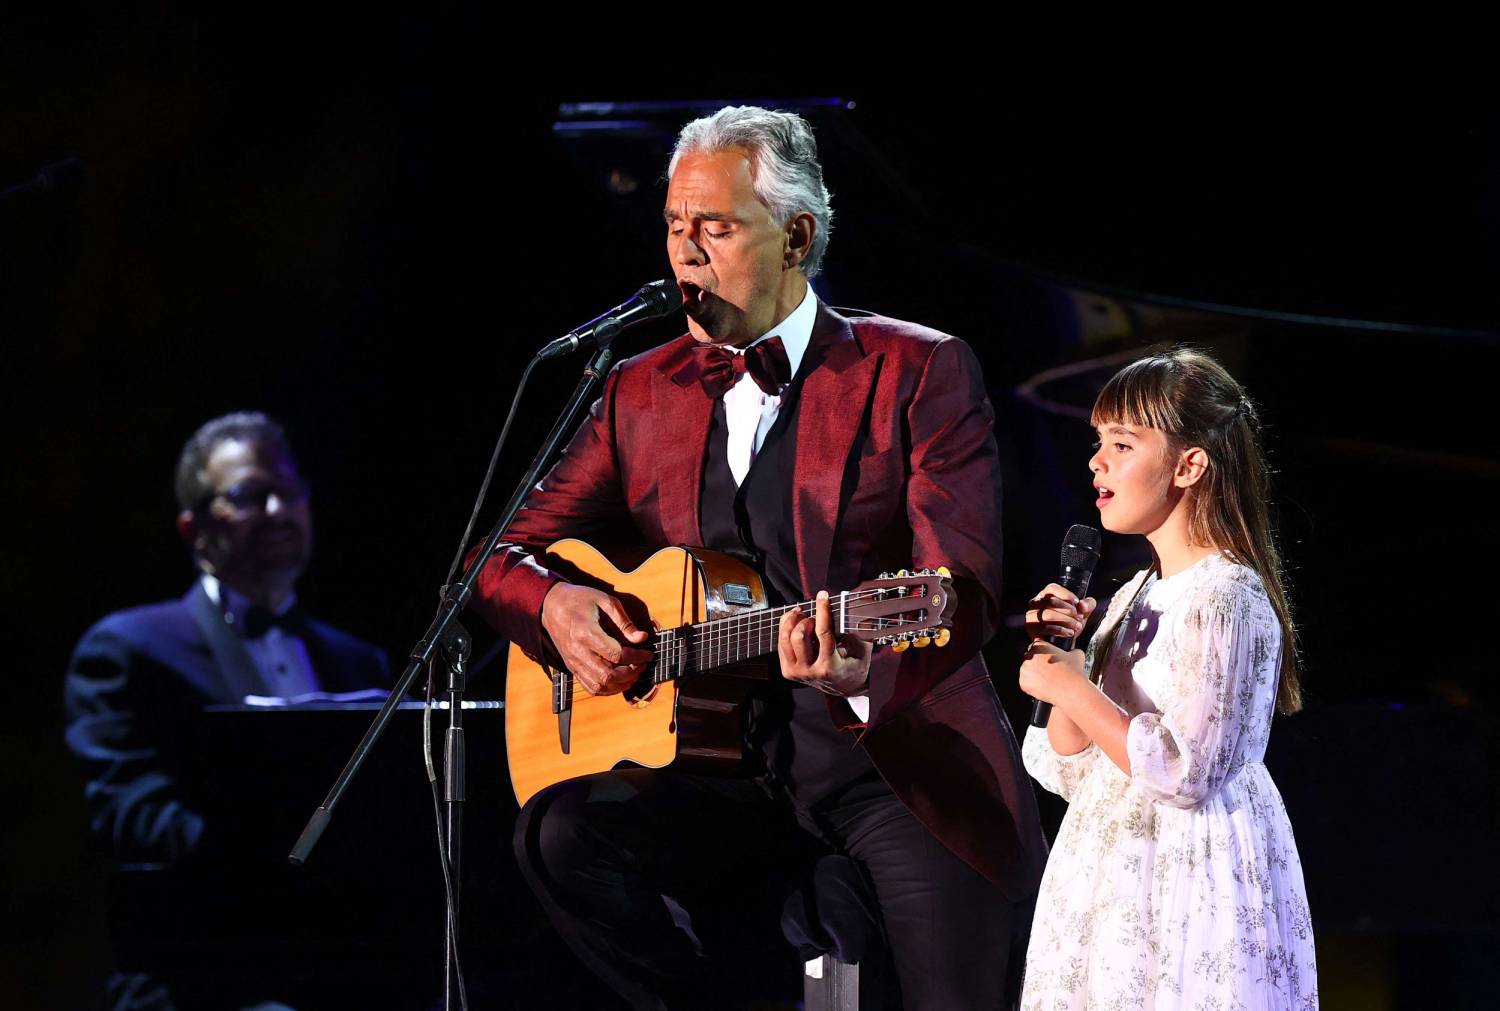 Bocelli in a duet with his young daughter Virginia